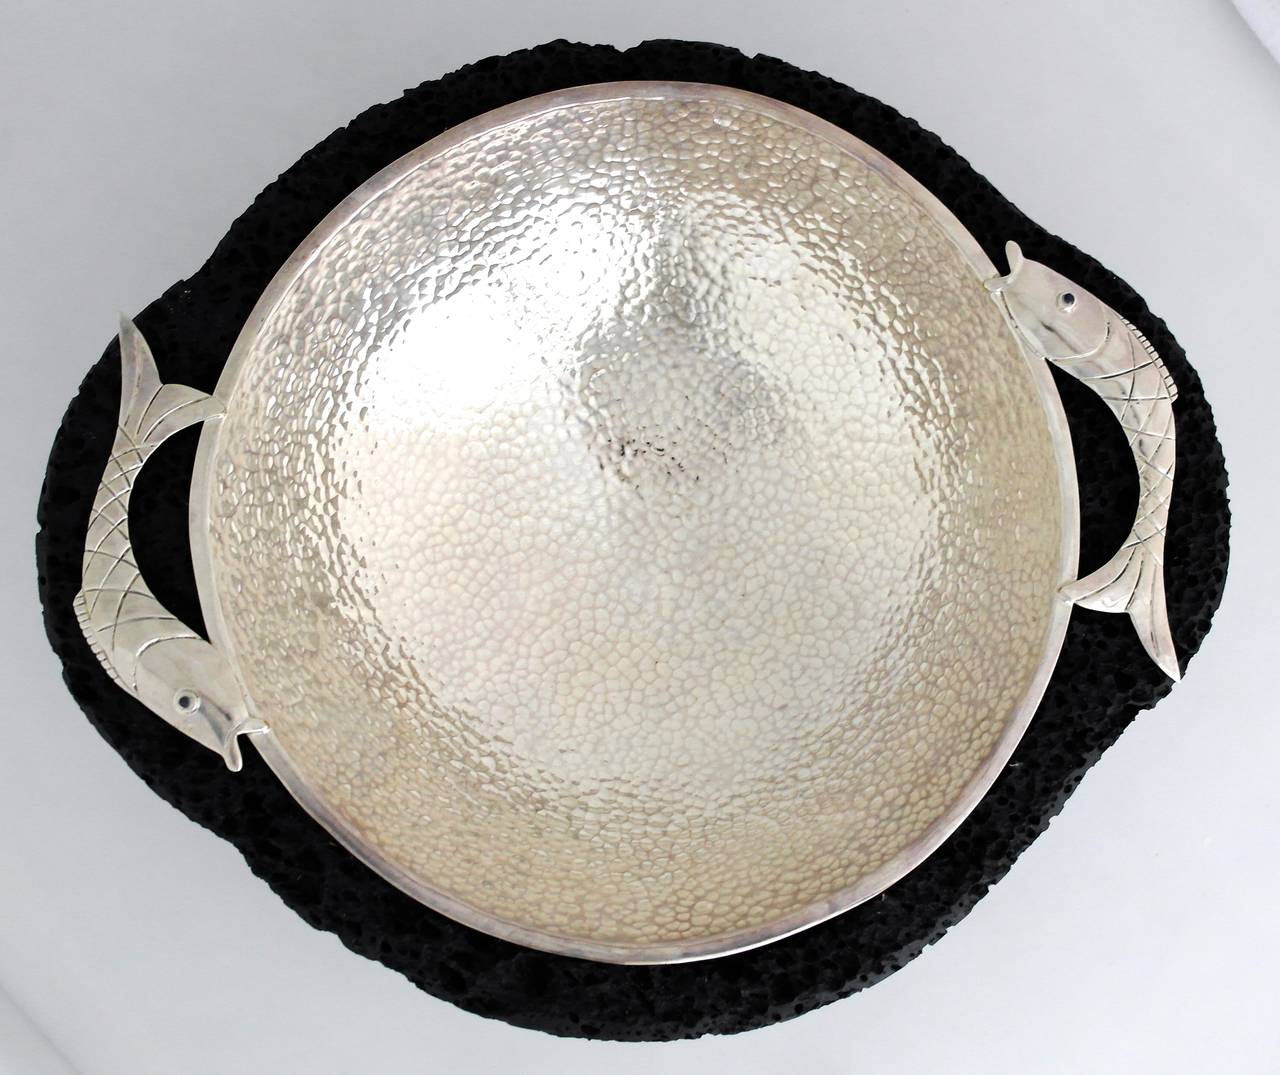 Being offered is a circa 1990 silver bowl by Emilia Castillo of Taxco, Mexico. Hand hammered bowl with fish motifs, resting on lava rock. Silver bowl is removable for cleaning. Dimensions: 14 inches diameter. Marked as illustrated. In excellent